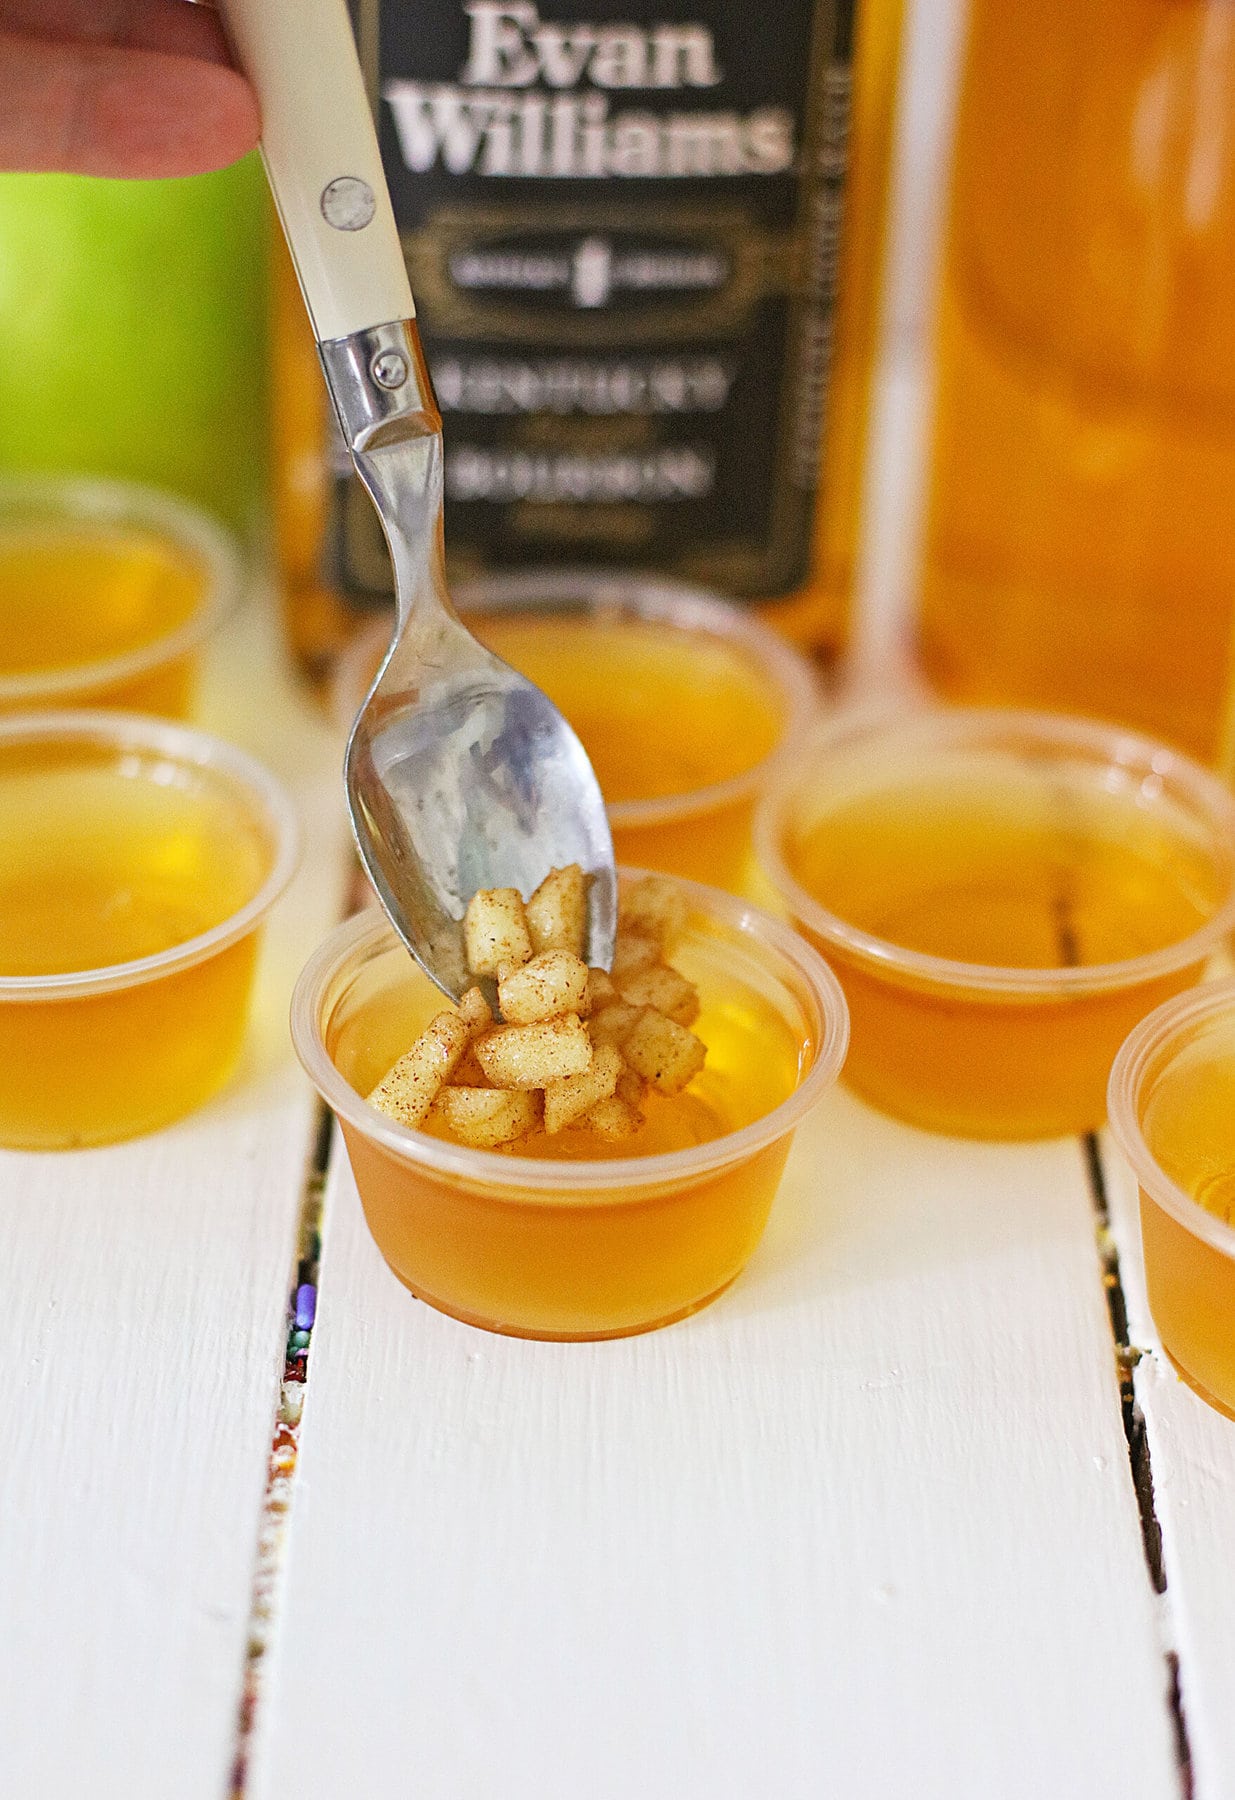 Putting the apples on the Apple Cider Bourbon Shots.